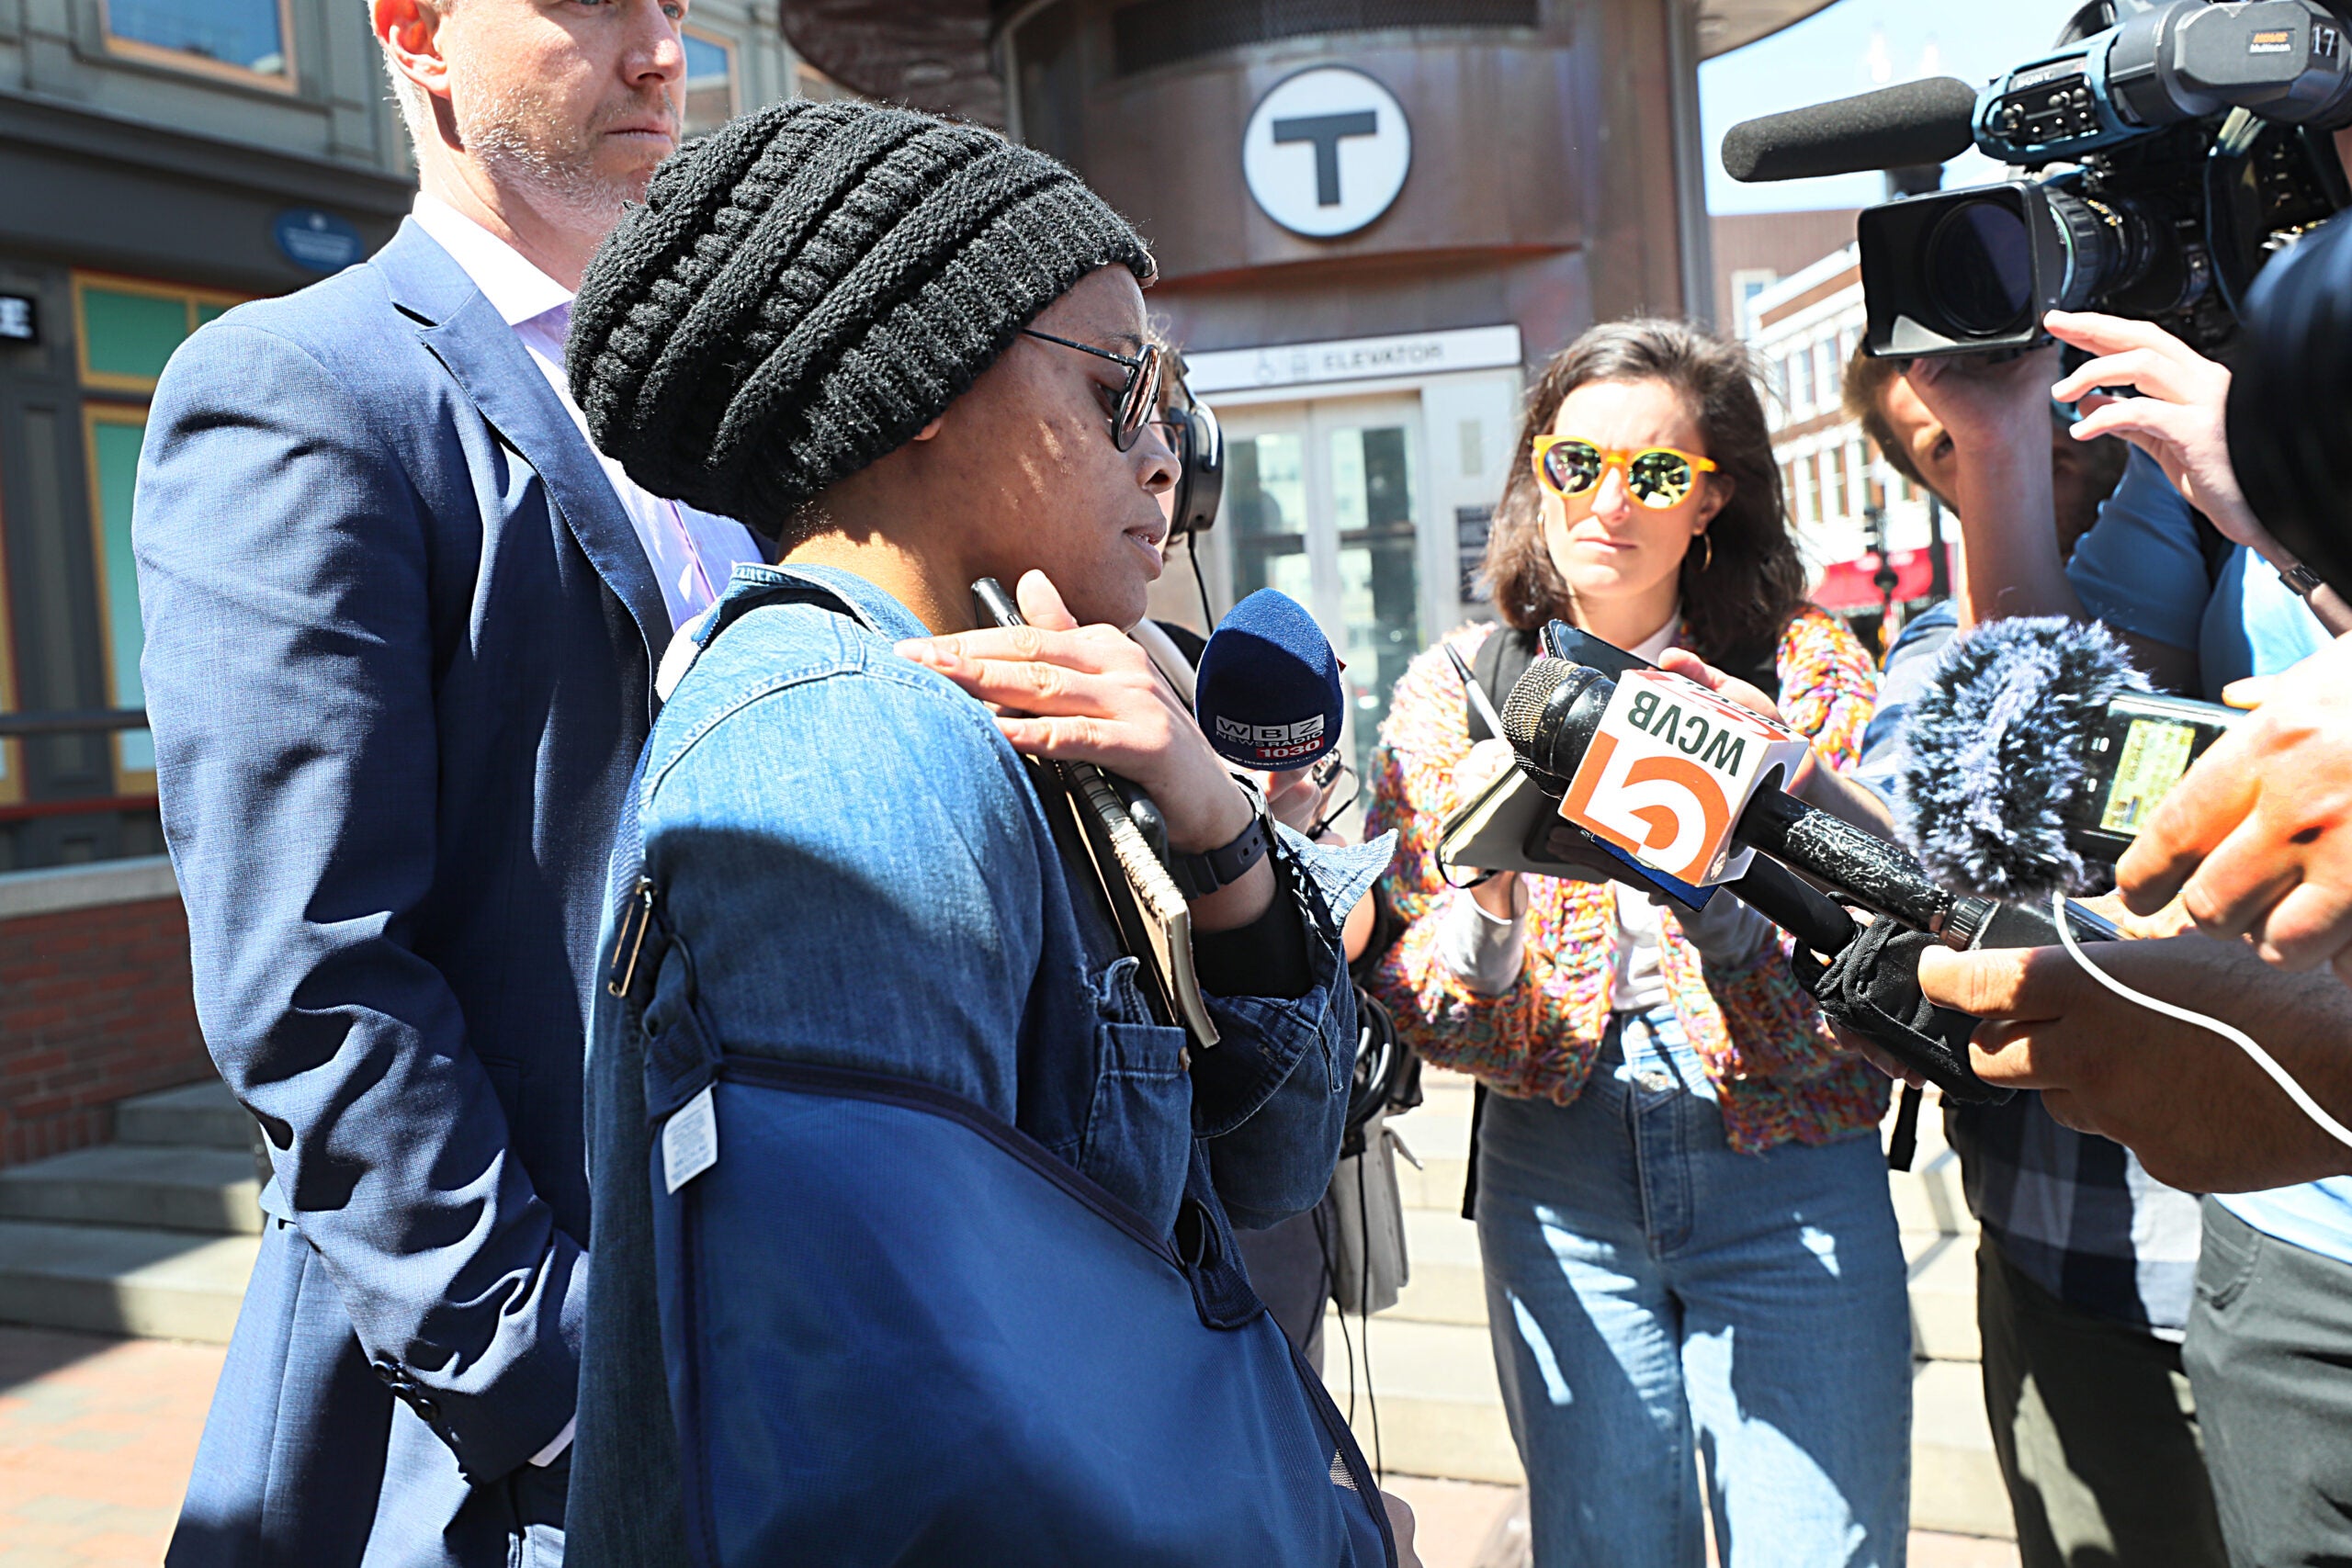 Joycelyn Johnson stands in the middle of a small crowd of people outside a T station. She is wearing a denim jacket, sunglasses, and a knit beanie, and her right arm is in a sling. She is gesturing to her right shoulder.